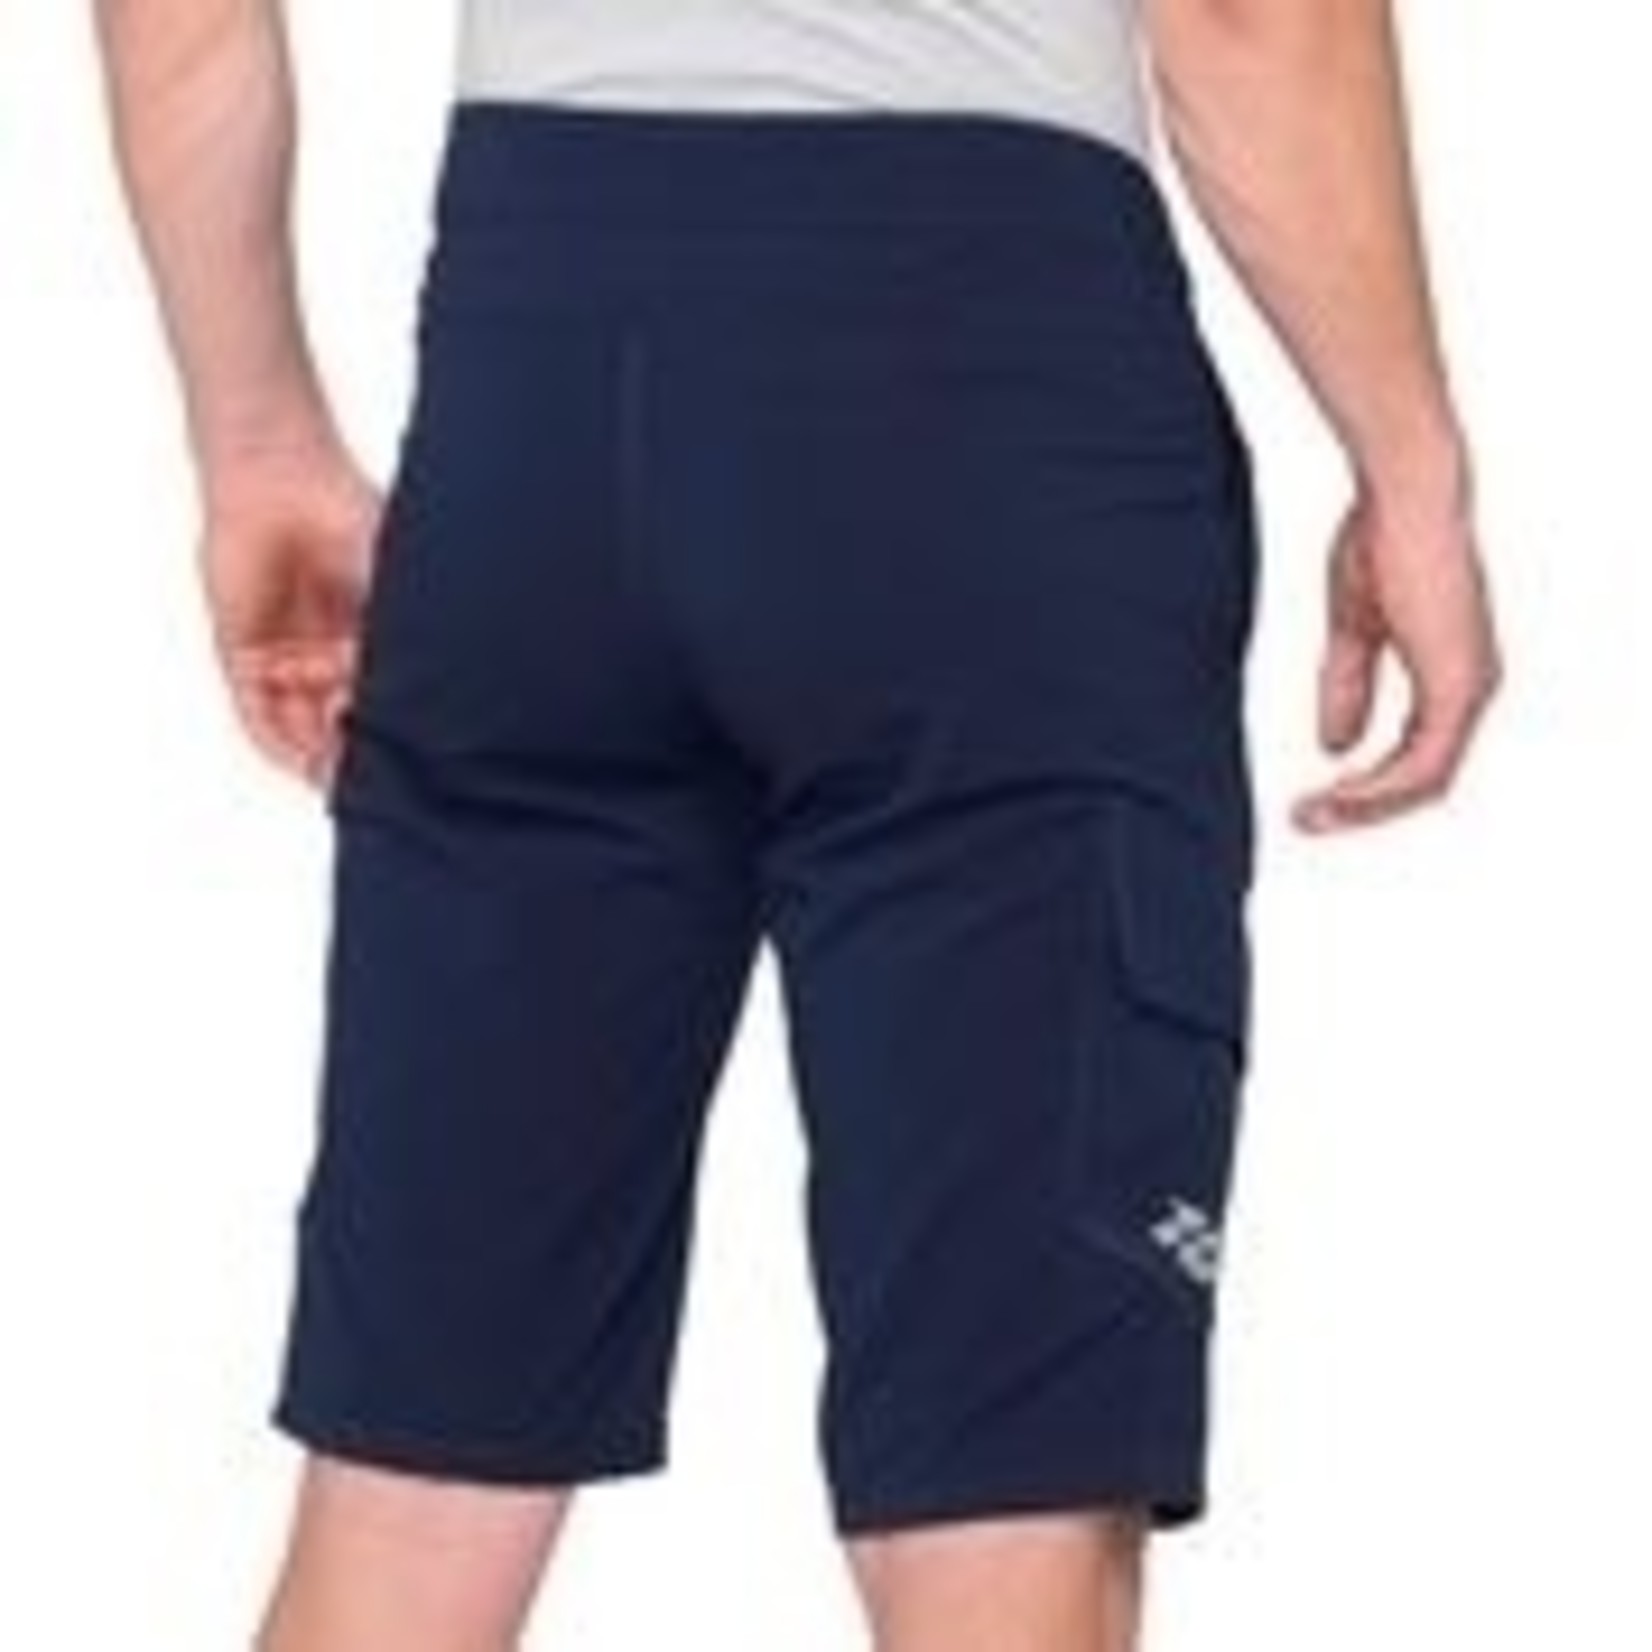 100% Ridecamp Bike Gear Men's 100% Polyester Shorts - Navy -Breathable, Comfort